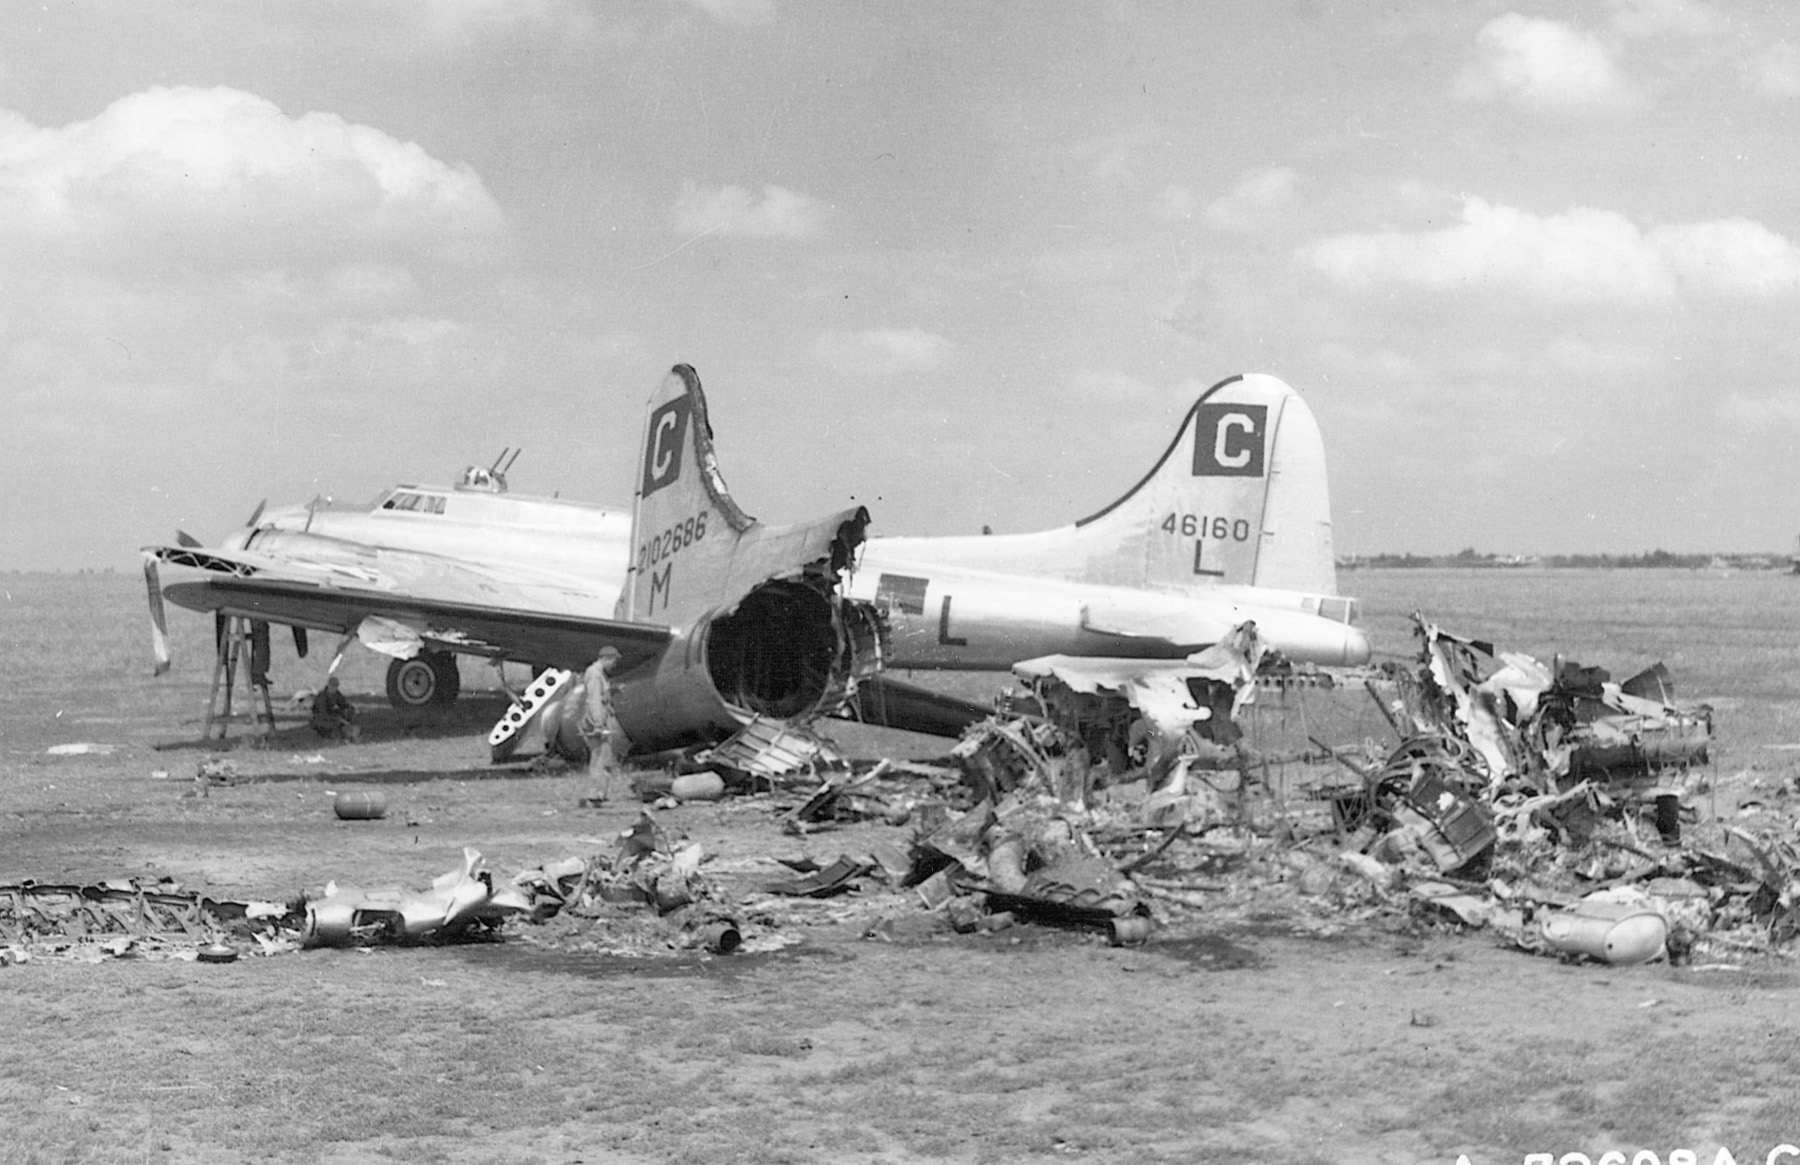 Some B-17s of the 96th Bomb Group were destroyed on the ground during a German raid on the Poltava air base, June 21, 1944.